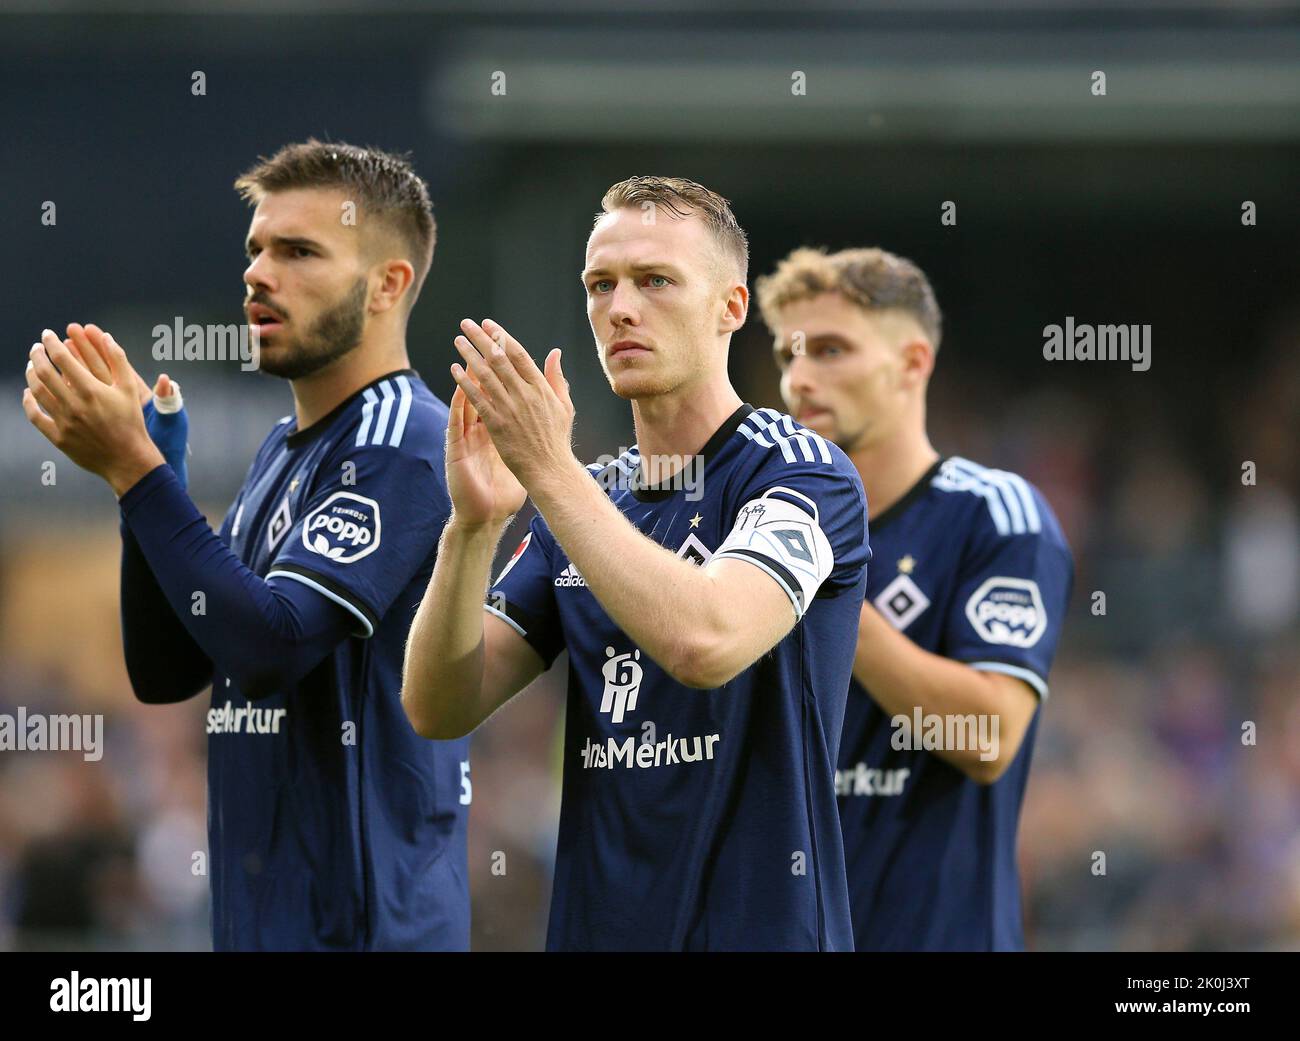 Kiel, Germany. 09th Sep, 2022. Soccer: 2nd Bundesliga, Holstein Kiel - Hamburger SV, Matchday 8. Sebastian Schonlau (center) and Mario Vuskovic (left) of HSV celebrate. Credit: Claus Bergmann/dpa - IMPORTANT NOTE: In accordance with the requirements of the DFL Deutsche Fußball Liga and the DFB Deutscher Fußball-Bund, it is prohibited to use or have used photographs taken in the stadium and/or of the match in the form of sequence pictures and/or video-like photo series./dpa/Alamy Live News Stock Photo